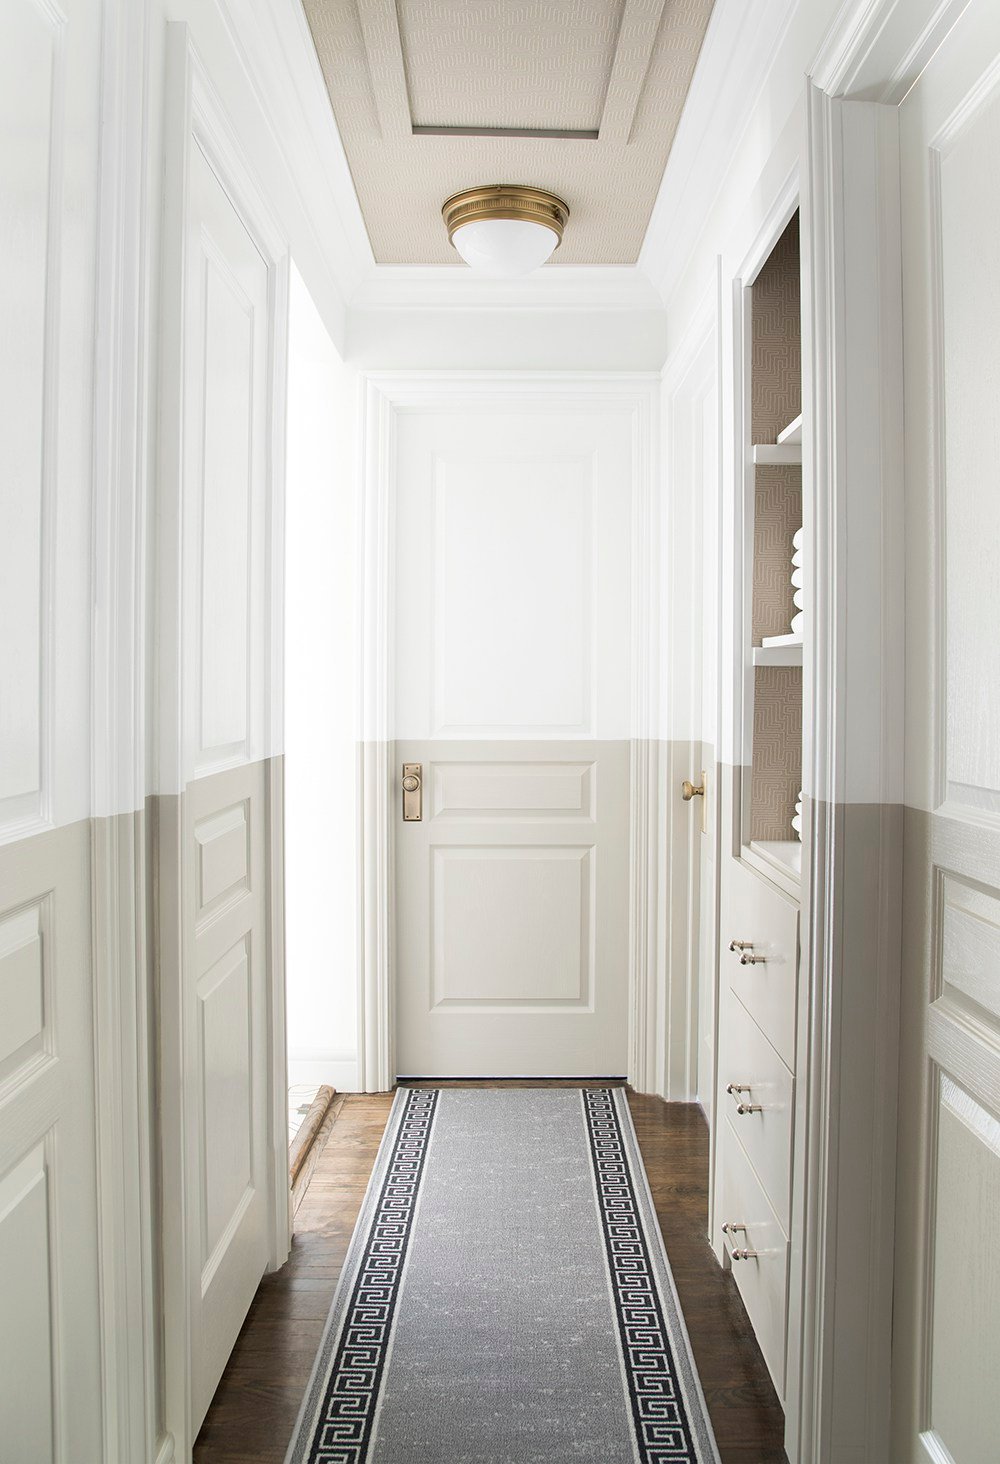 Neutral Hallway Runners that Add Pattern & Texture - roomfortuesday.com